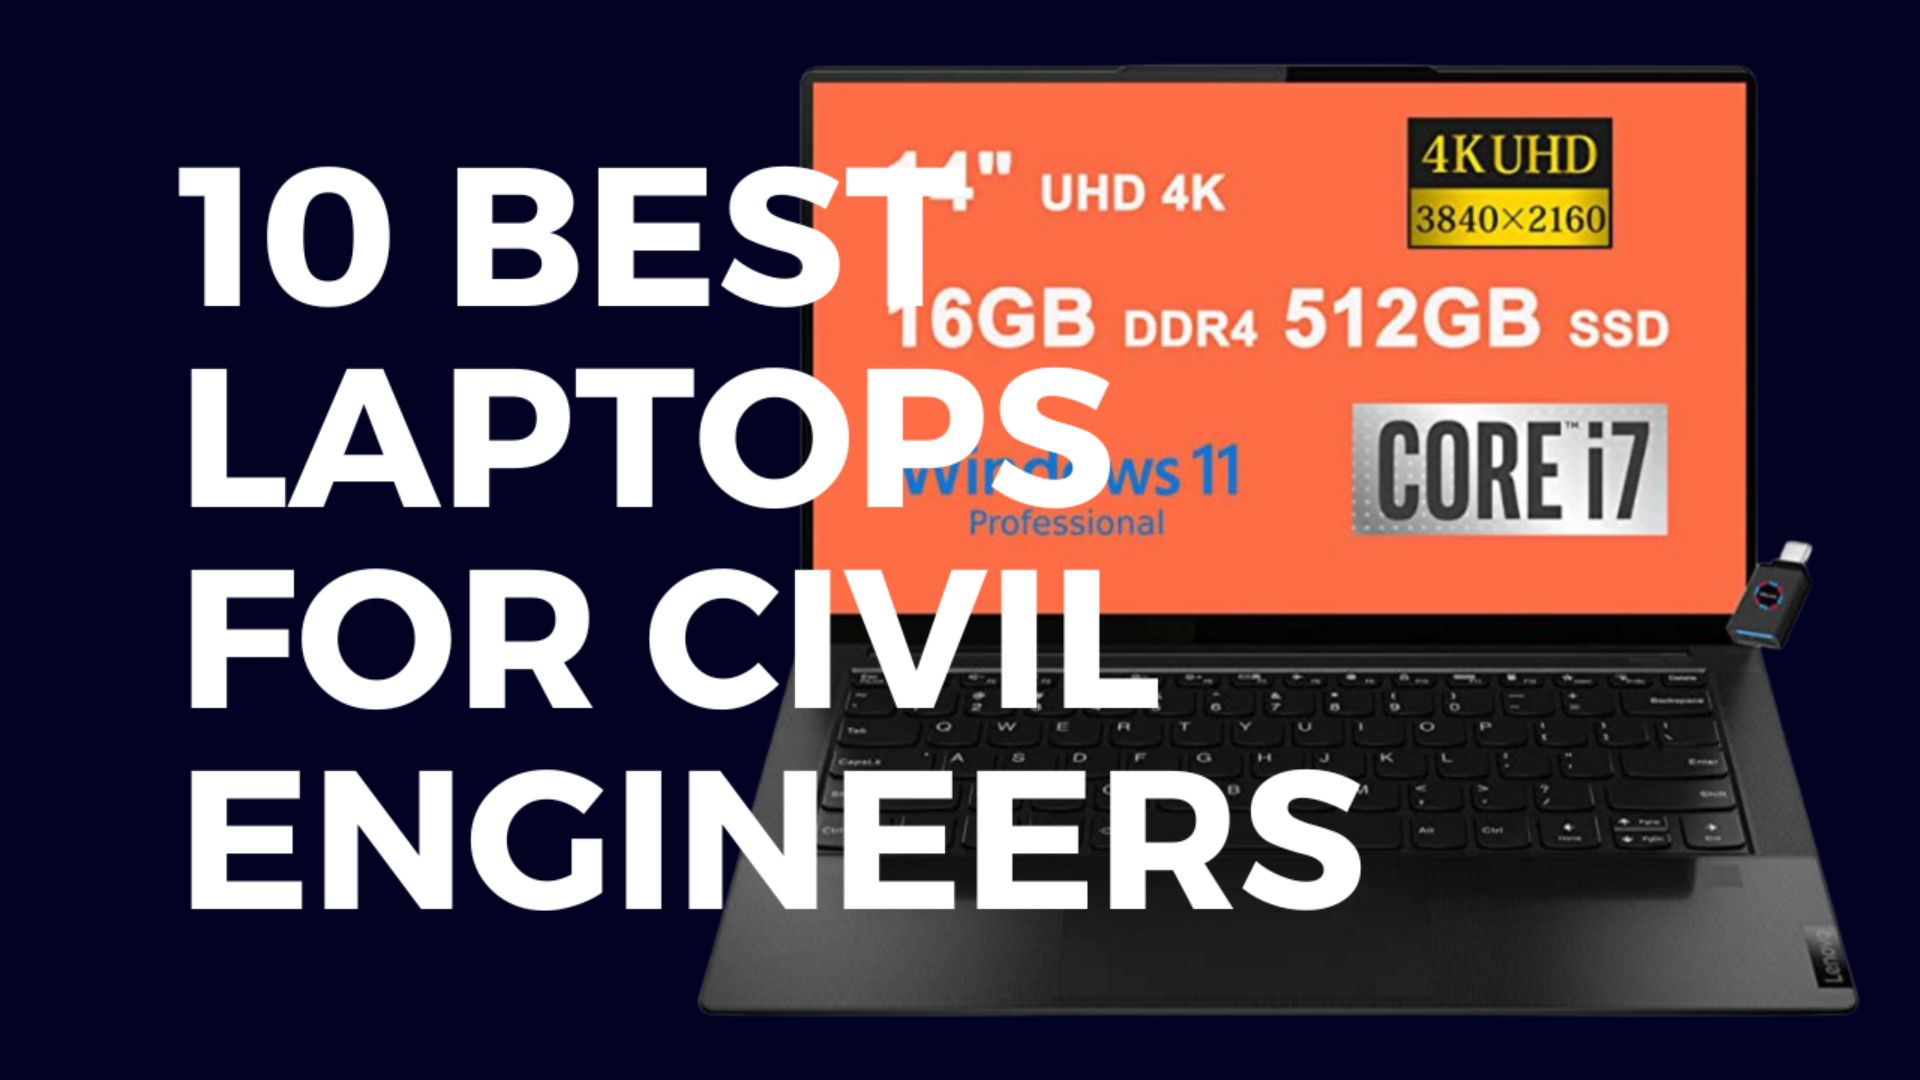 10 Best Laptops for Civil Engineers